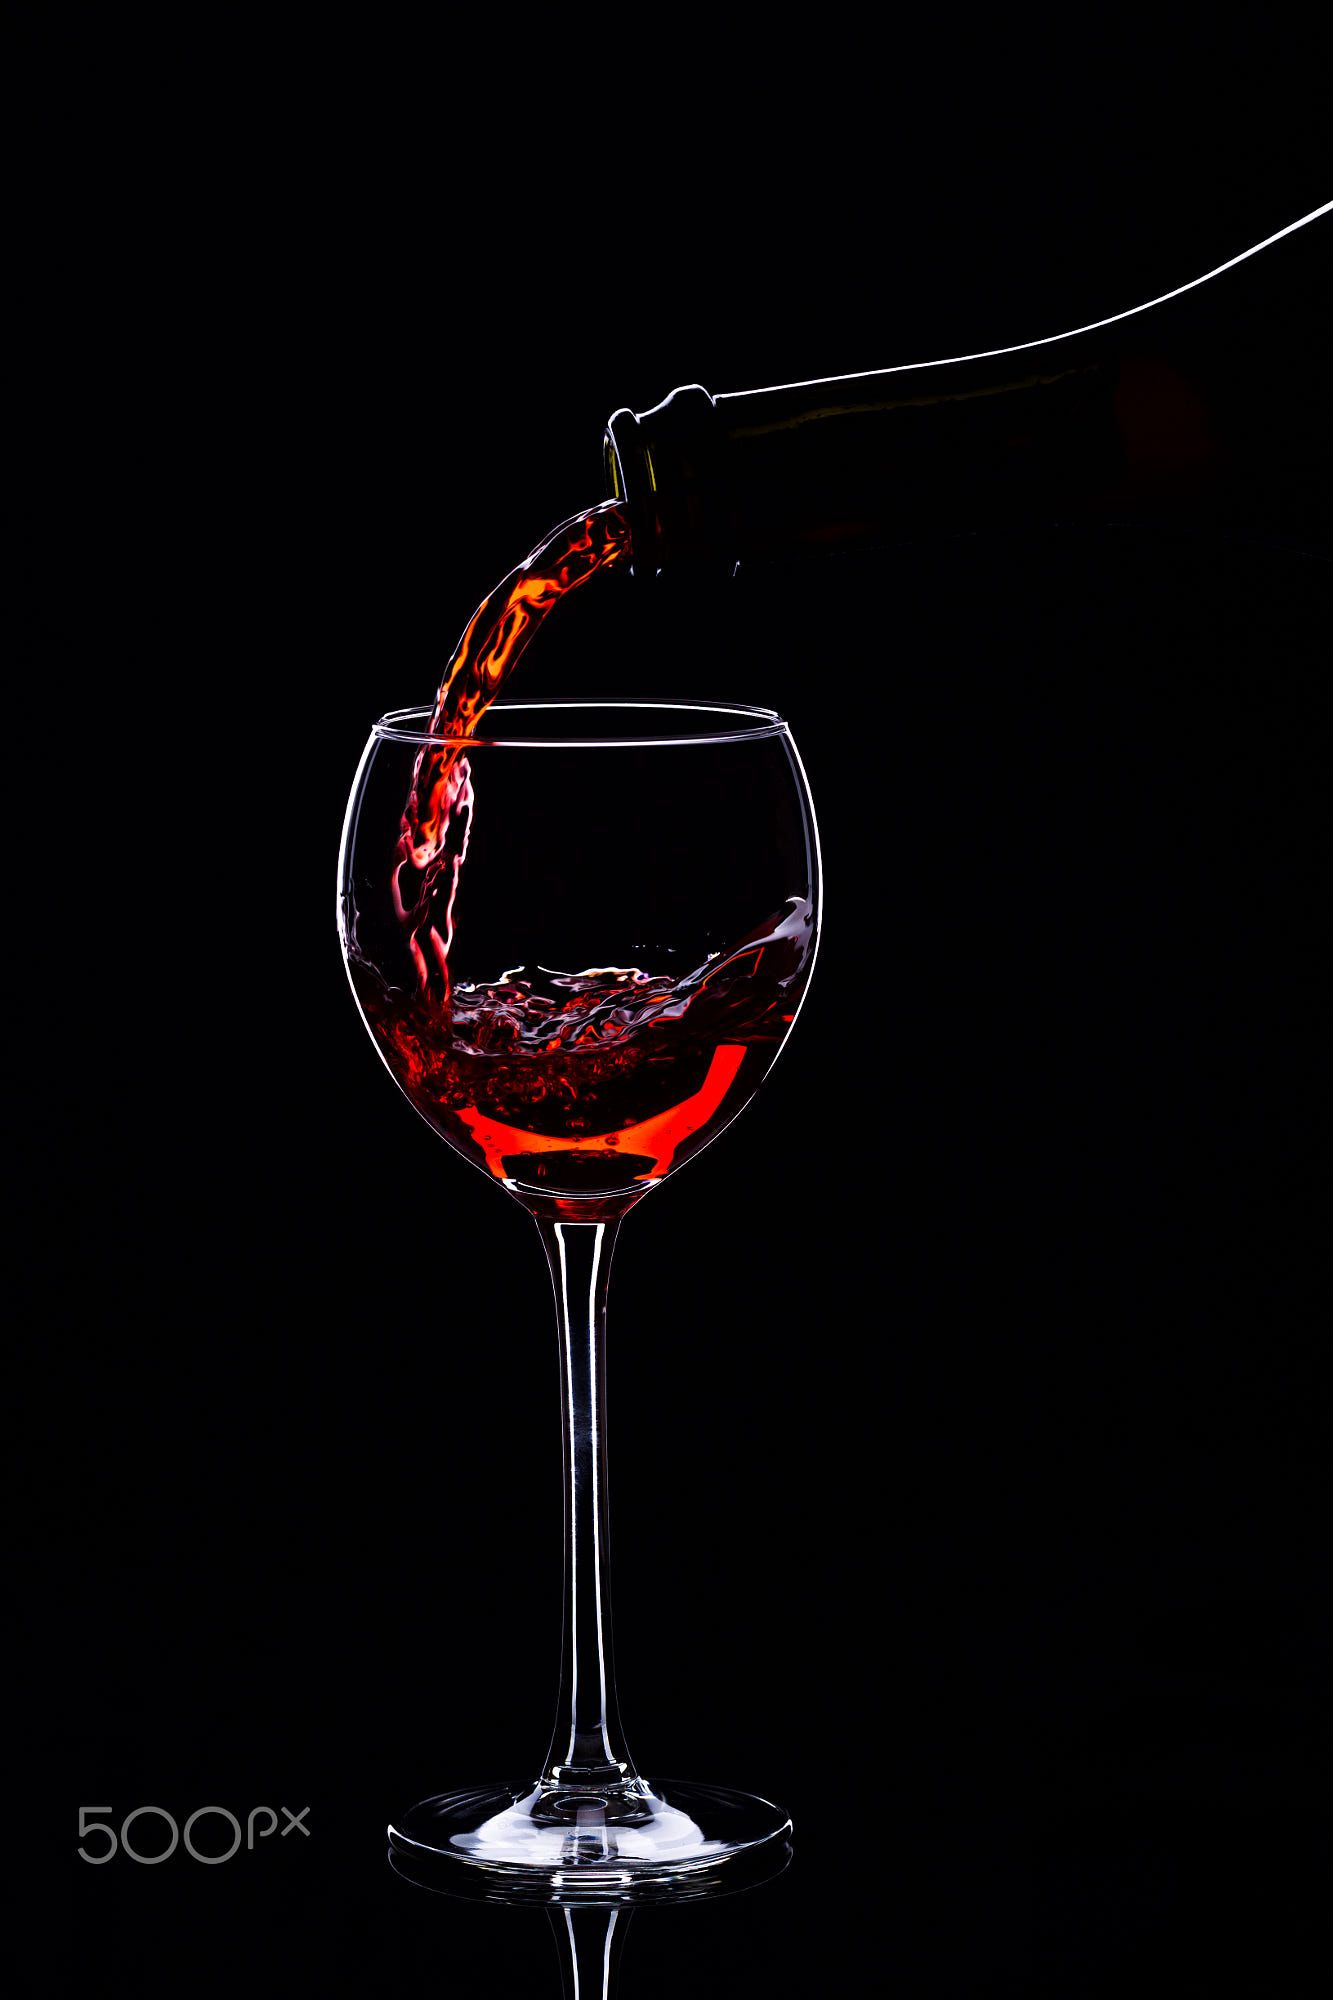 Red Wine In Glasses And Bottle On A Black Background